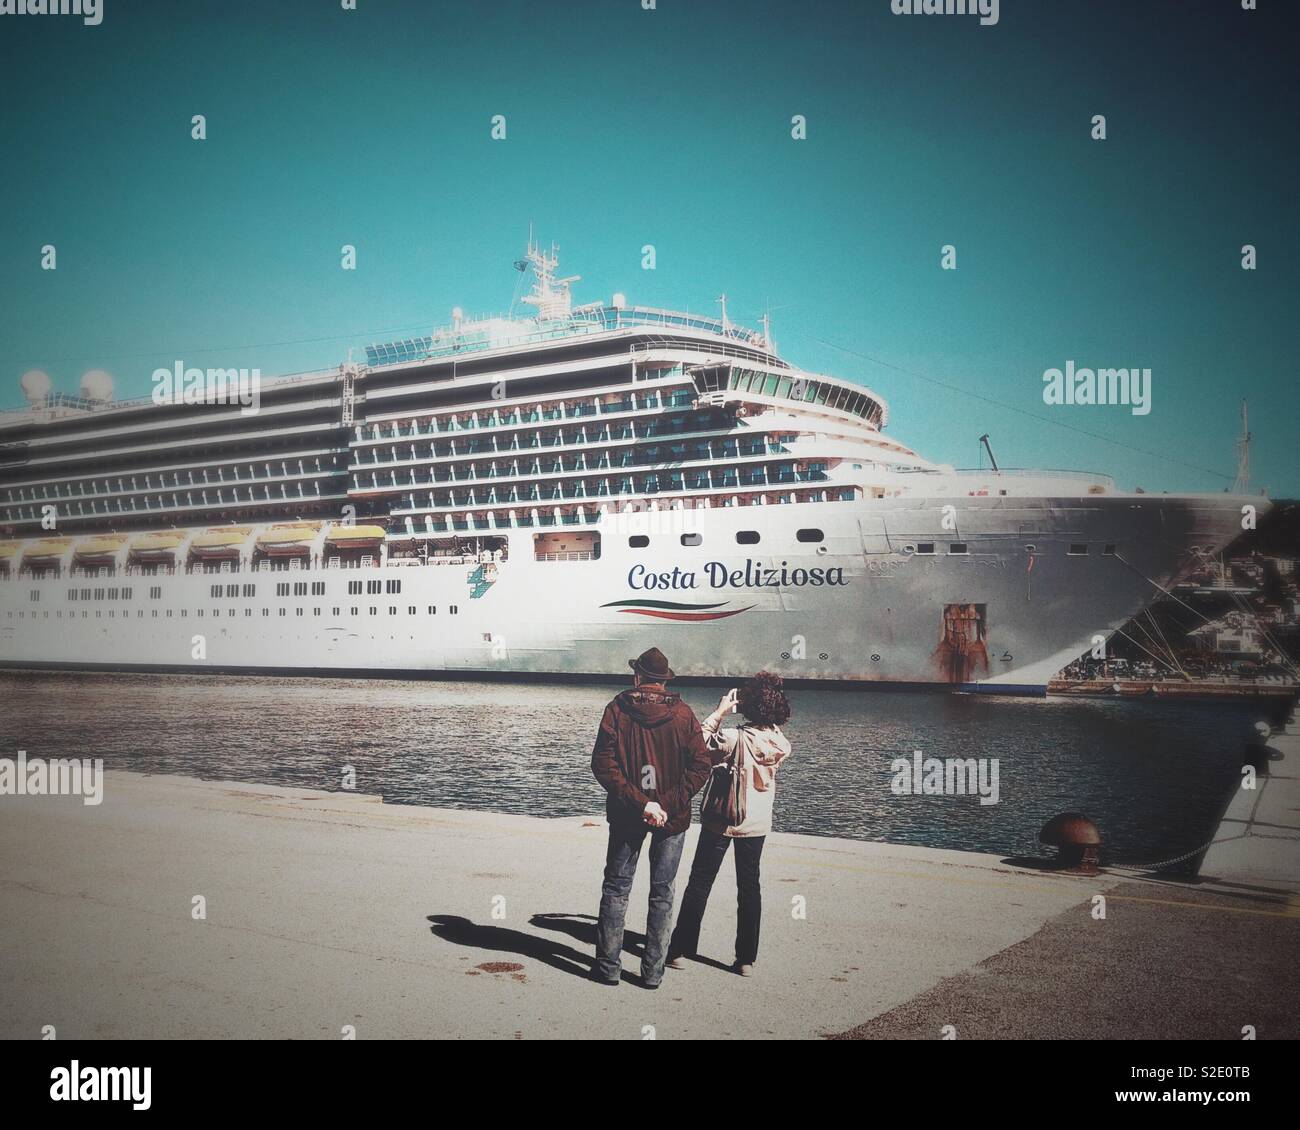 All 105+ Images person standing next to cruise ship Latest